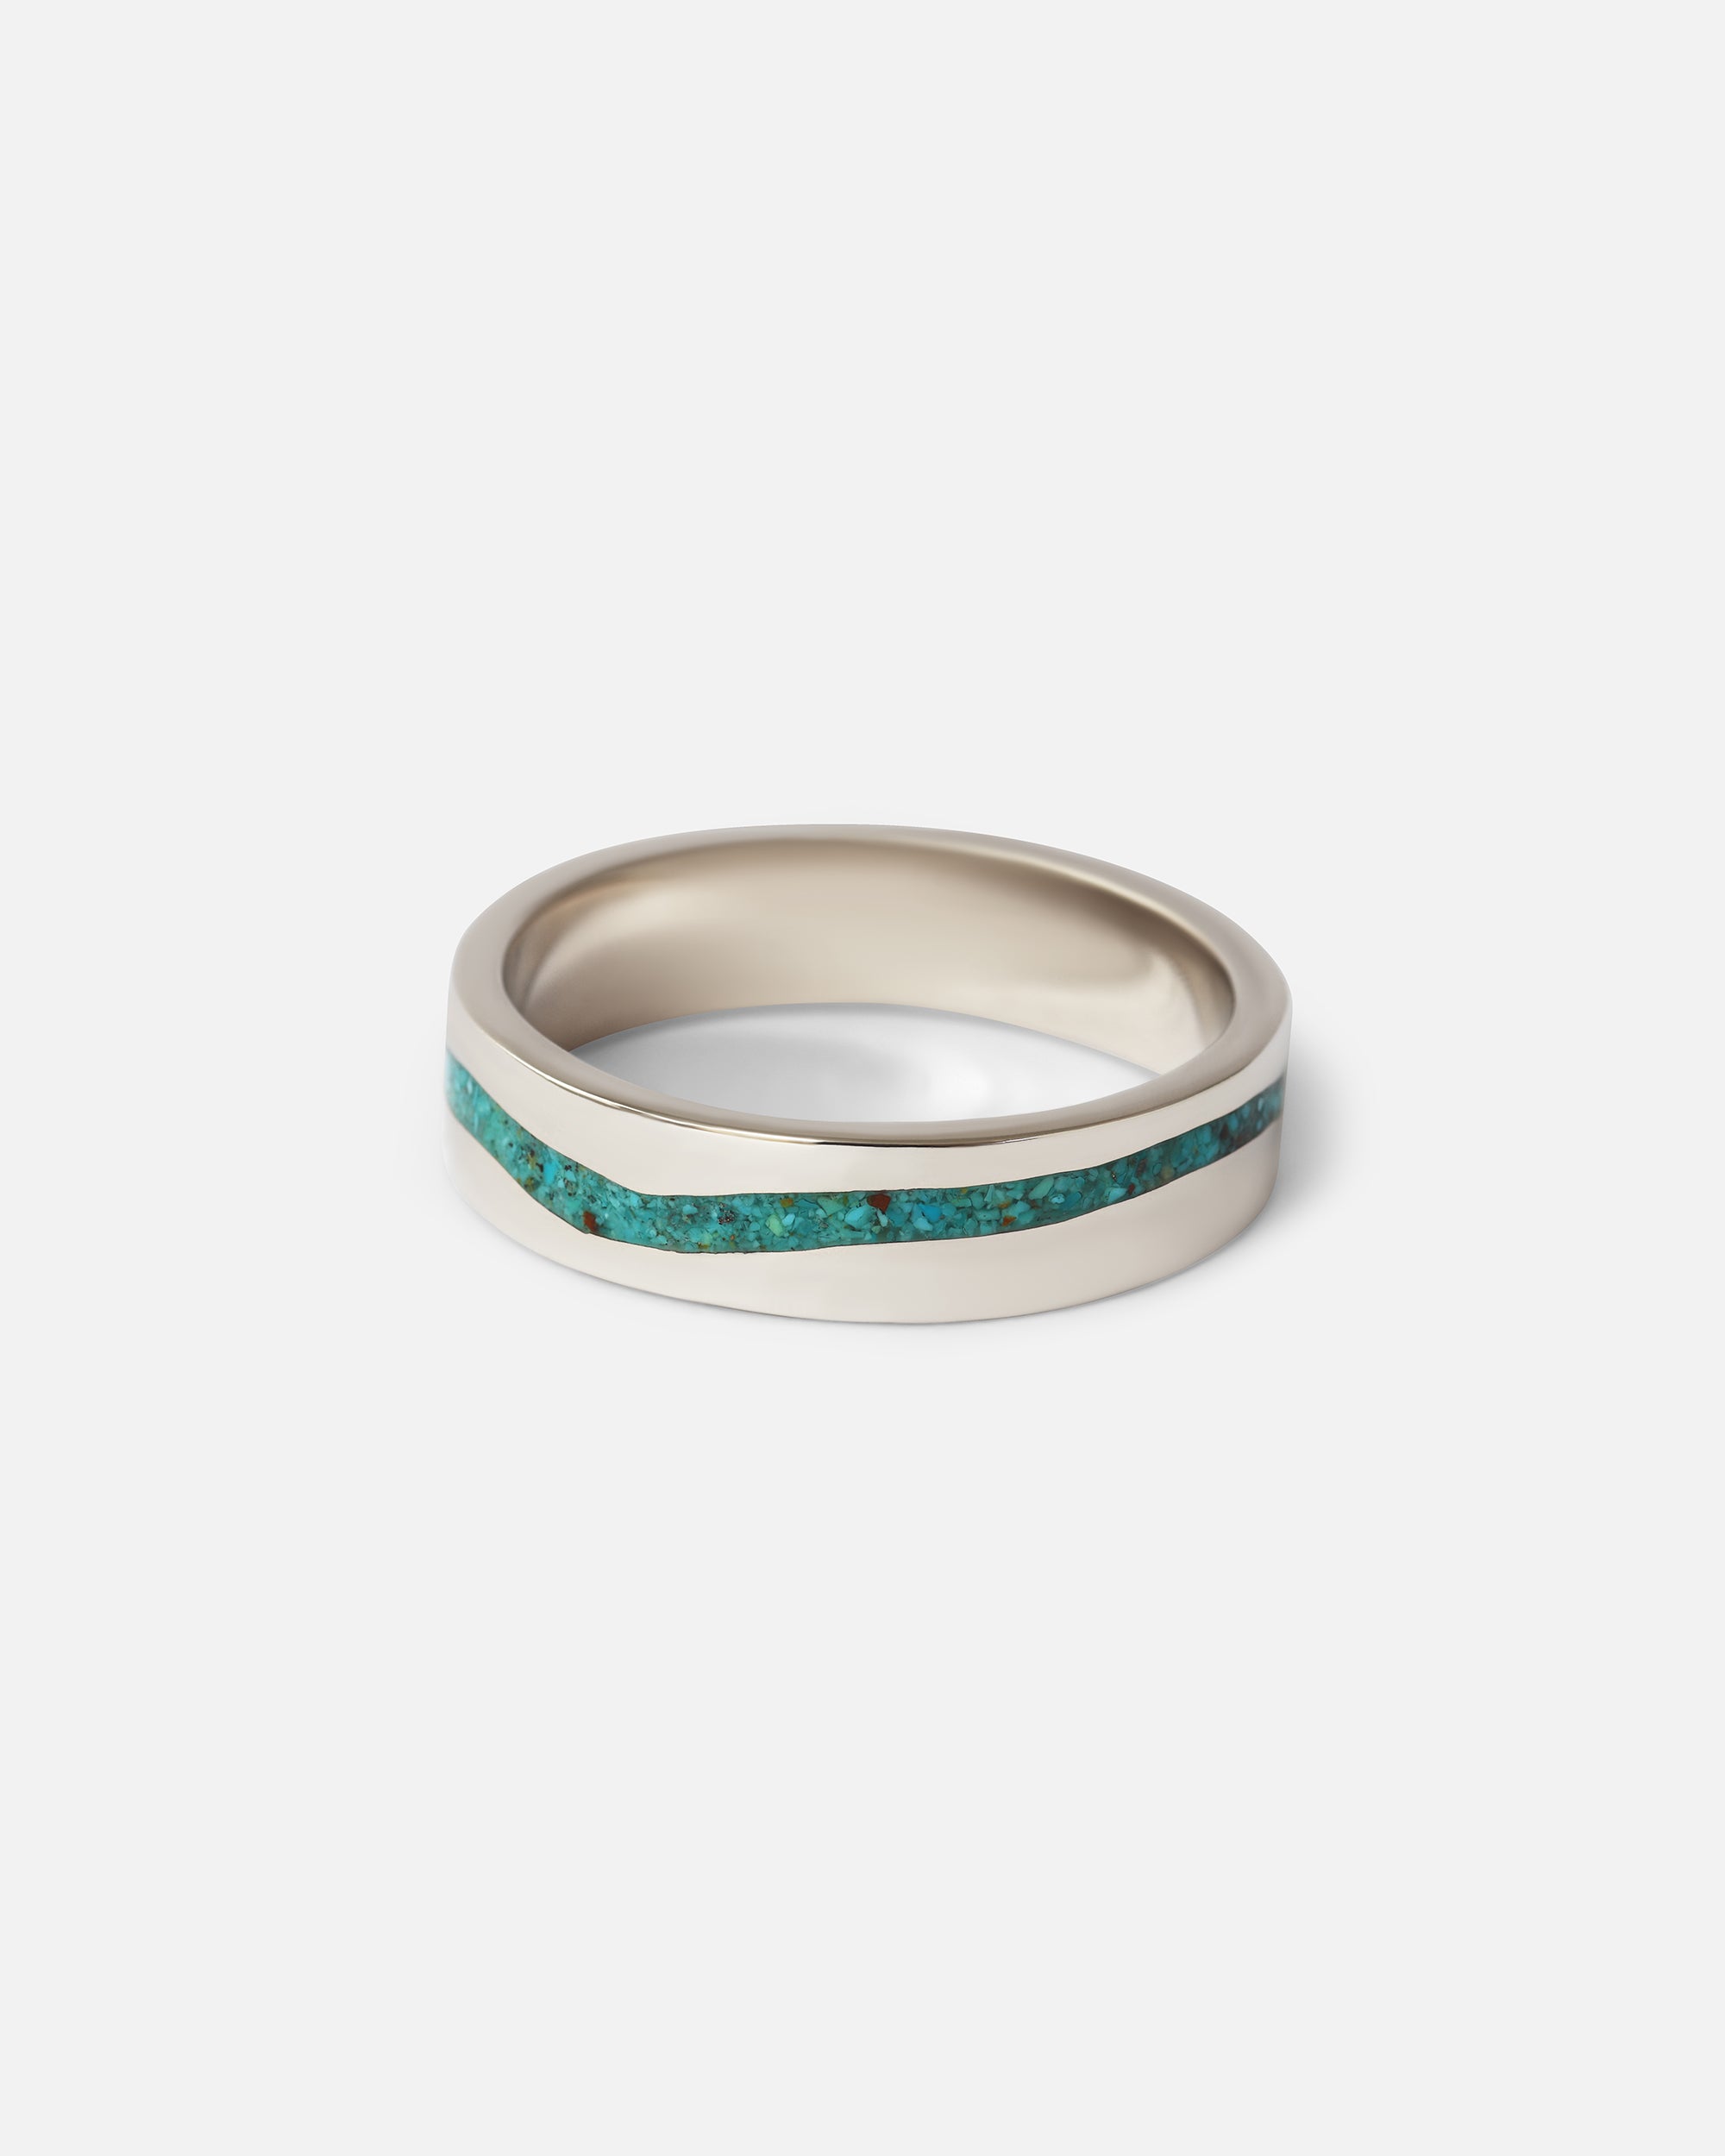 River Inlay Band By Kestrel Dillon in Wedding Bands Category